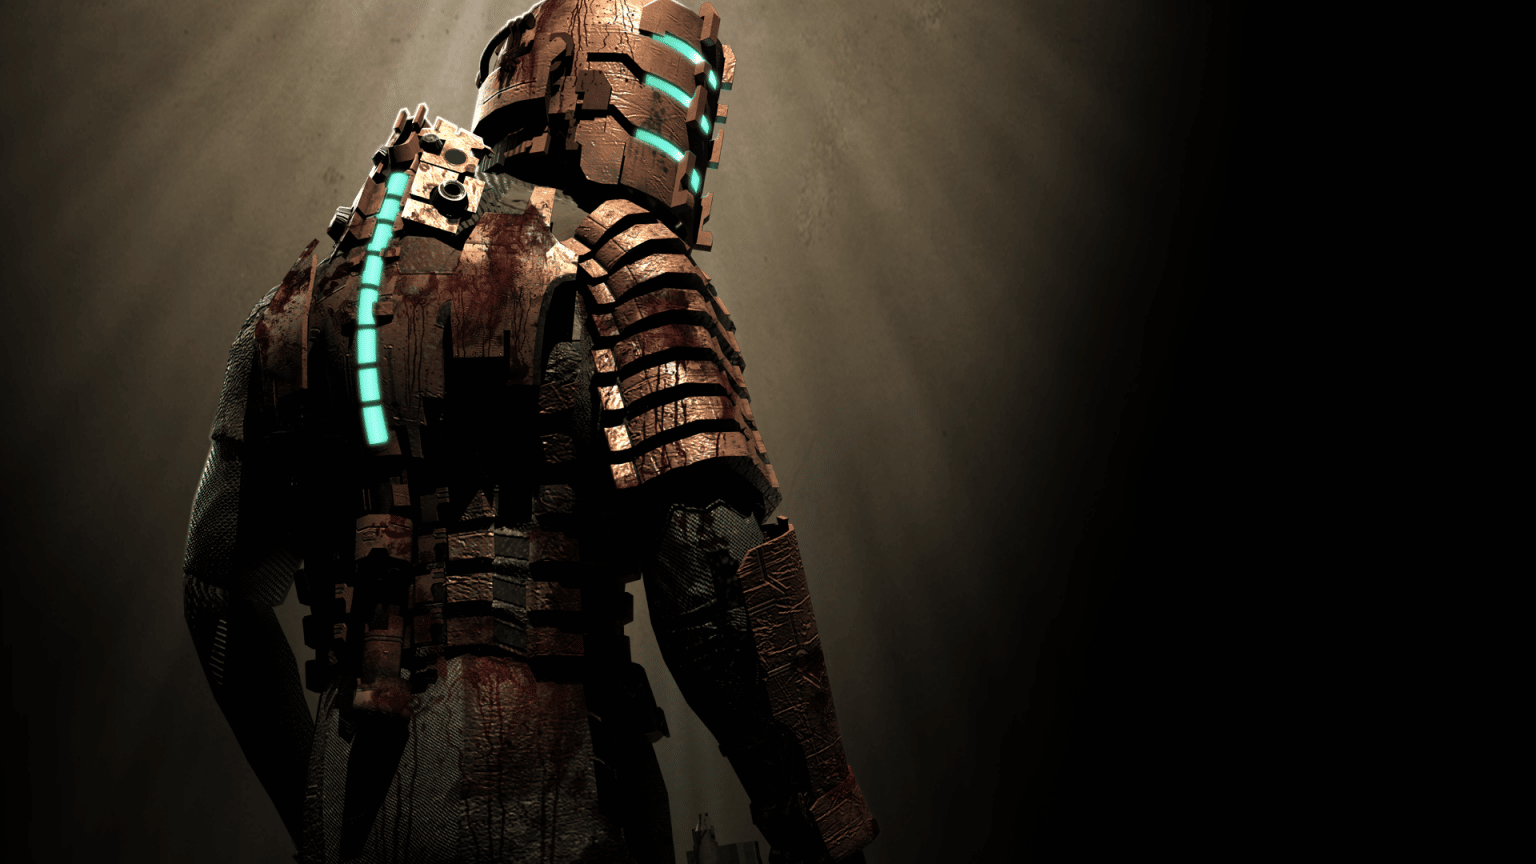 dead space remake release date ps4